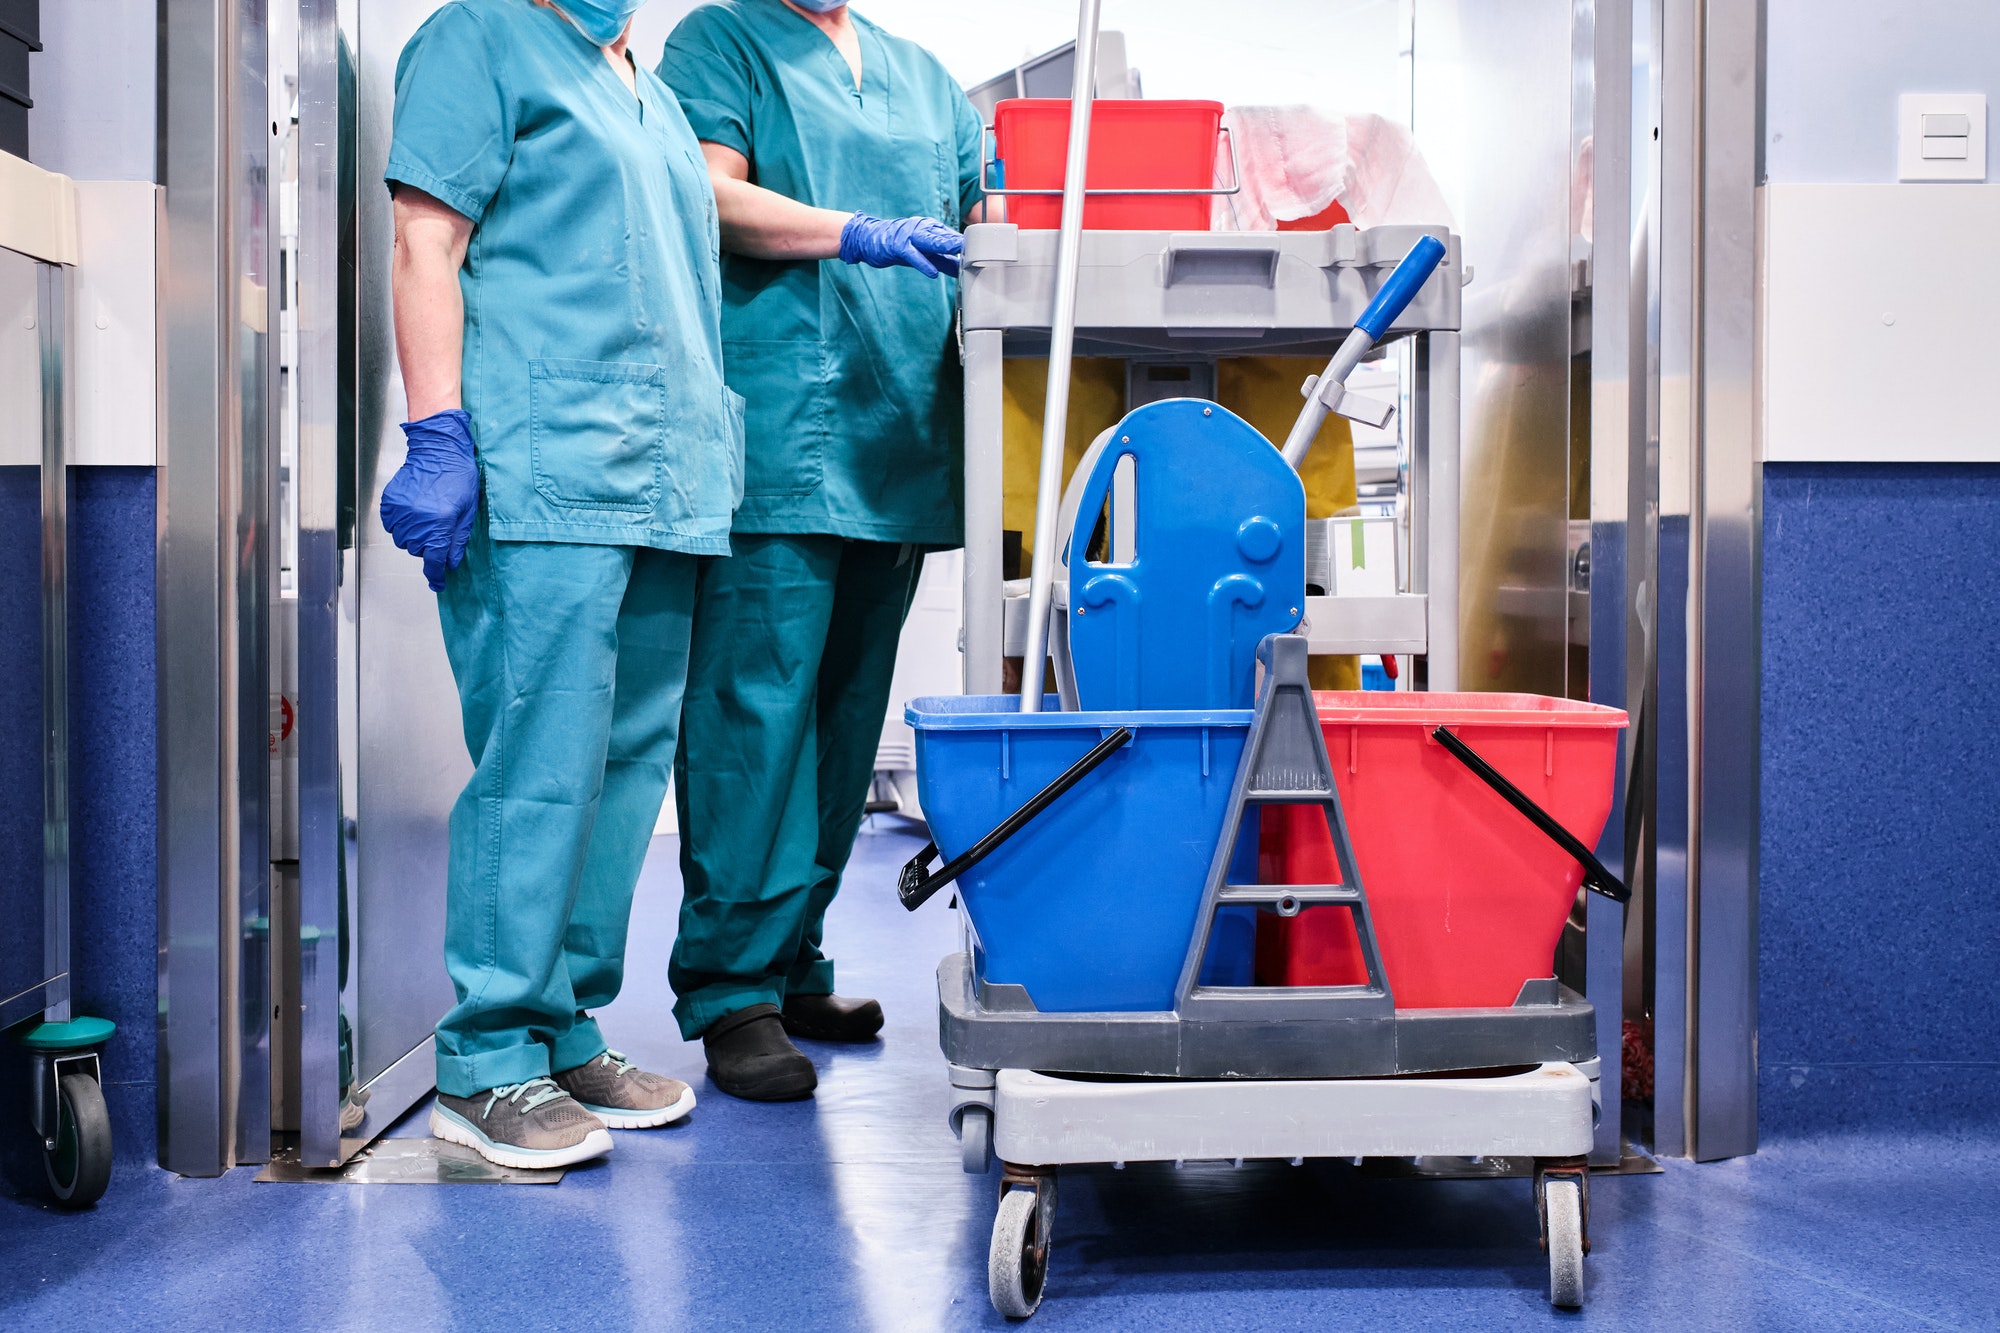 cleaning staff next to a cleaning cart at a hospital